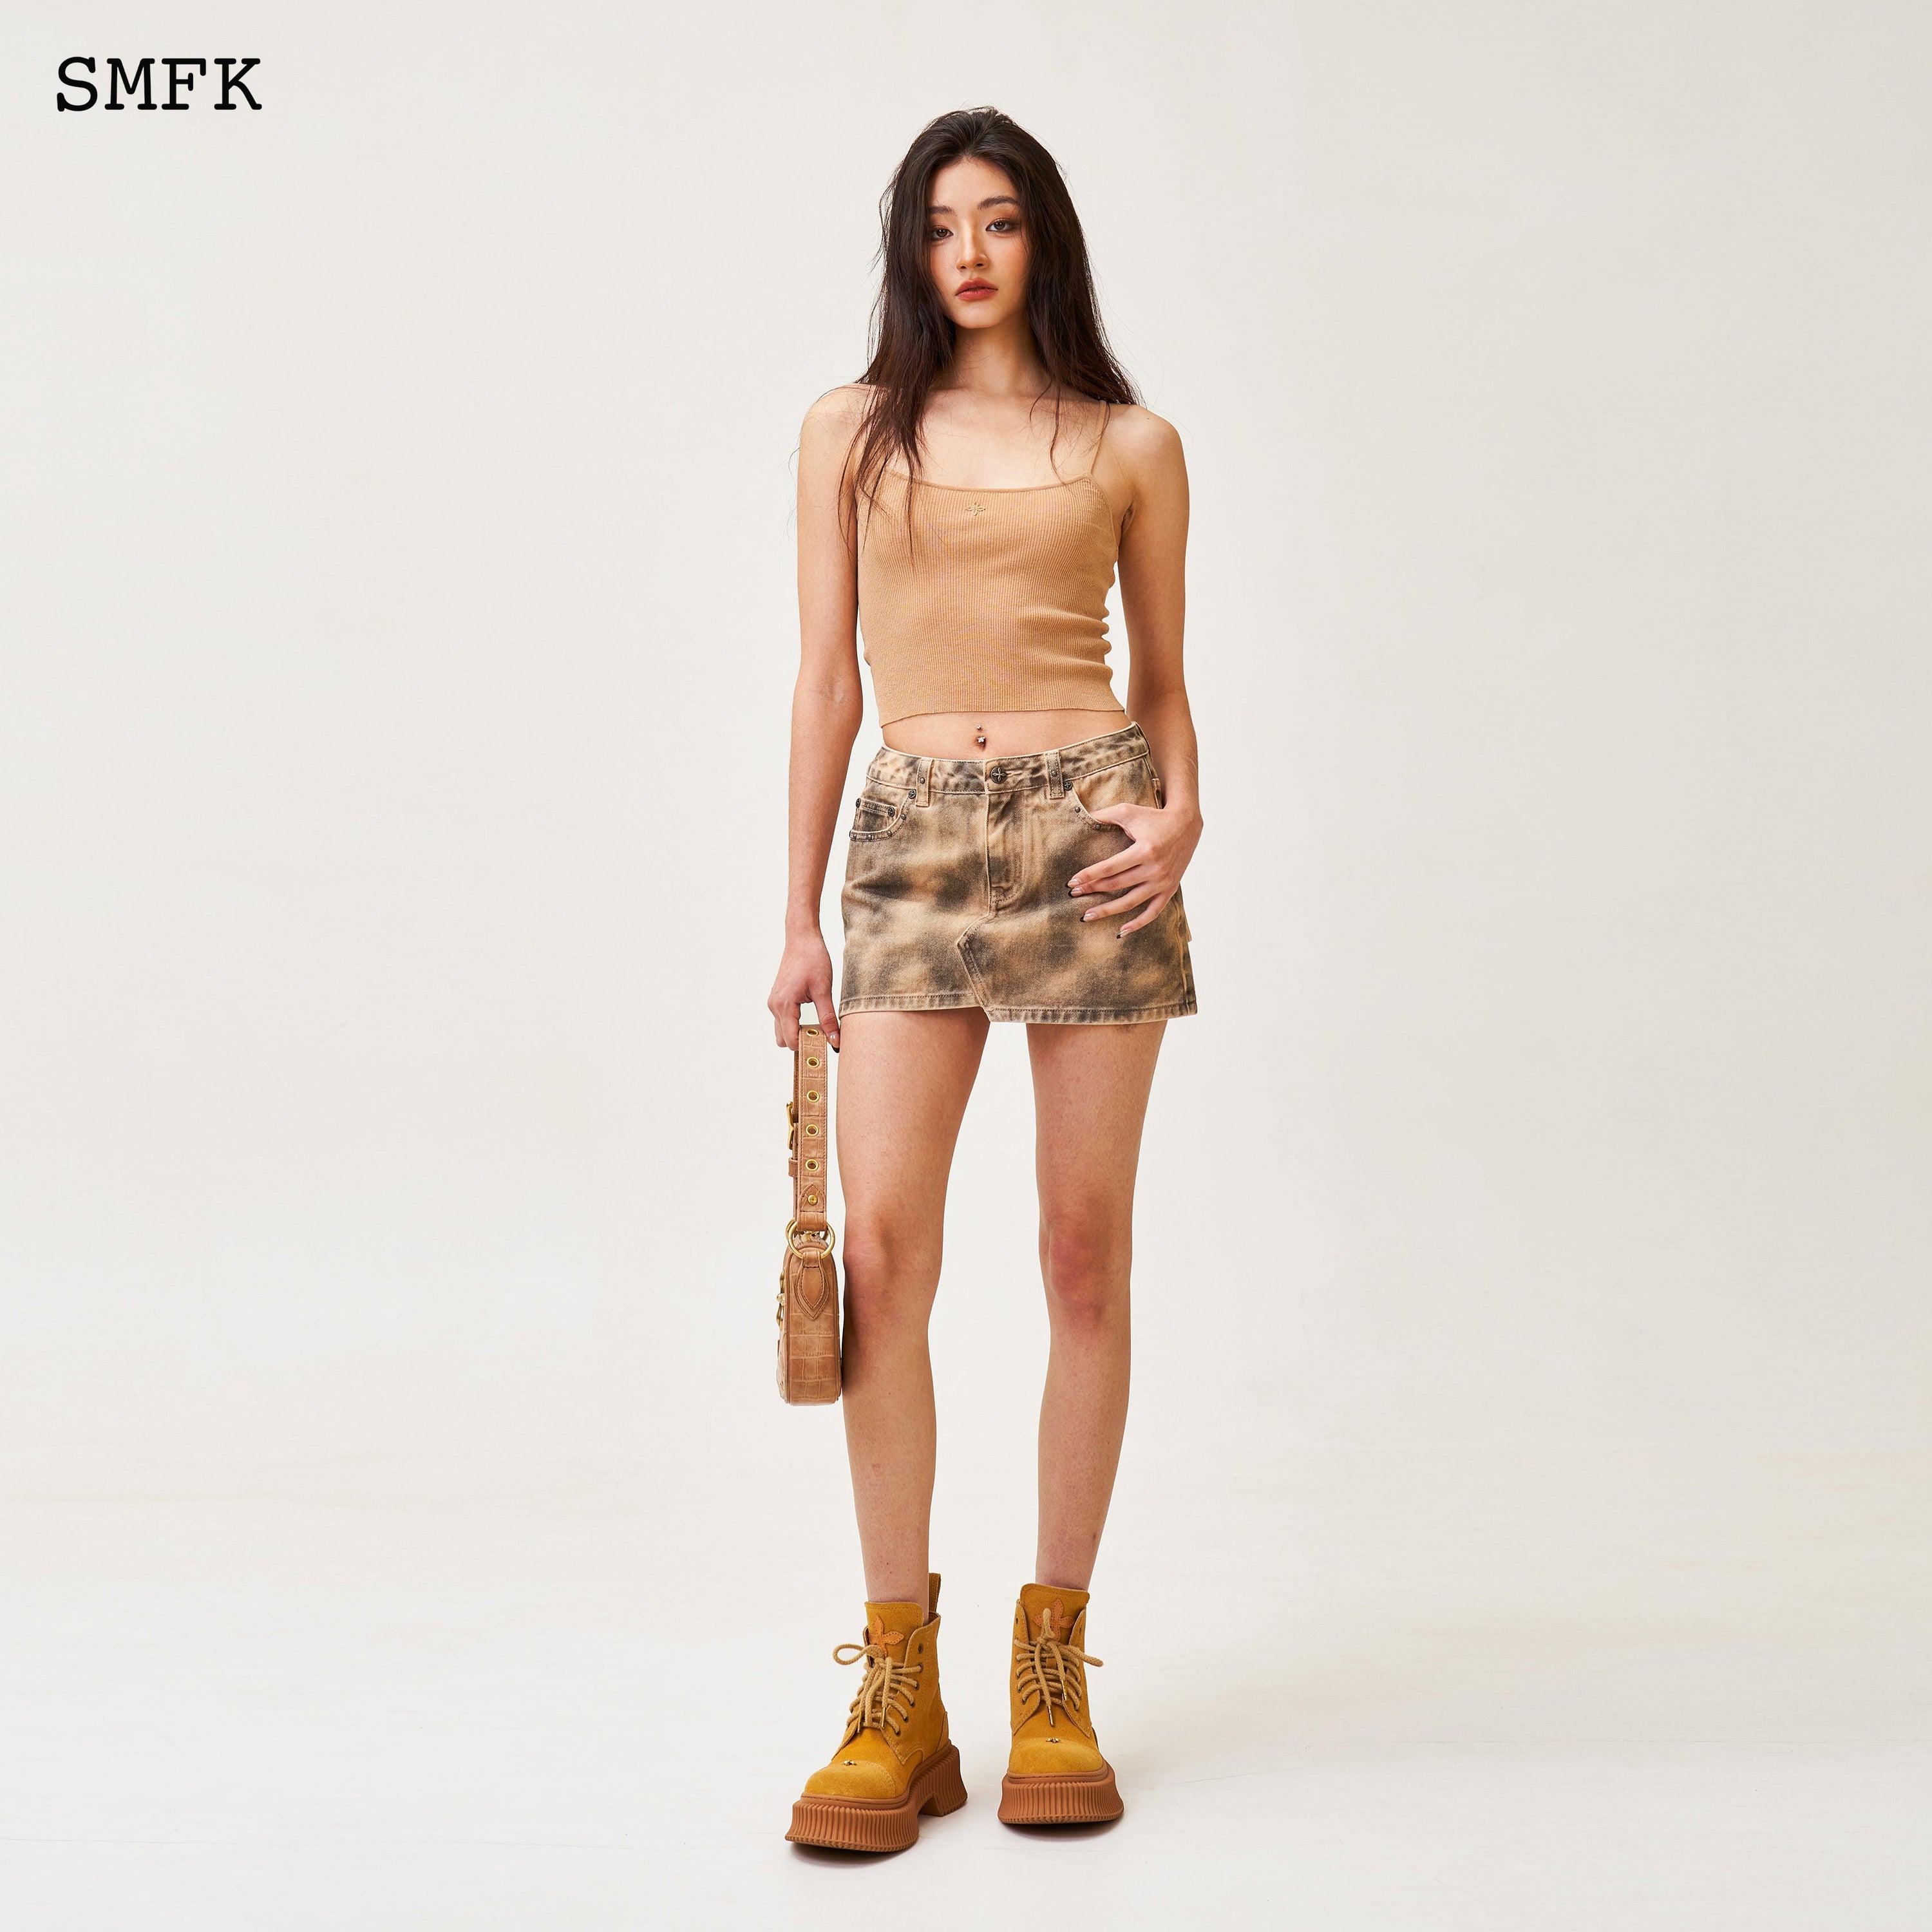 Compass Cross Classic Knitted Vest Top Nude - SMFK Official